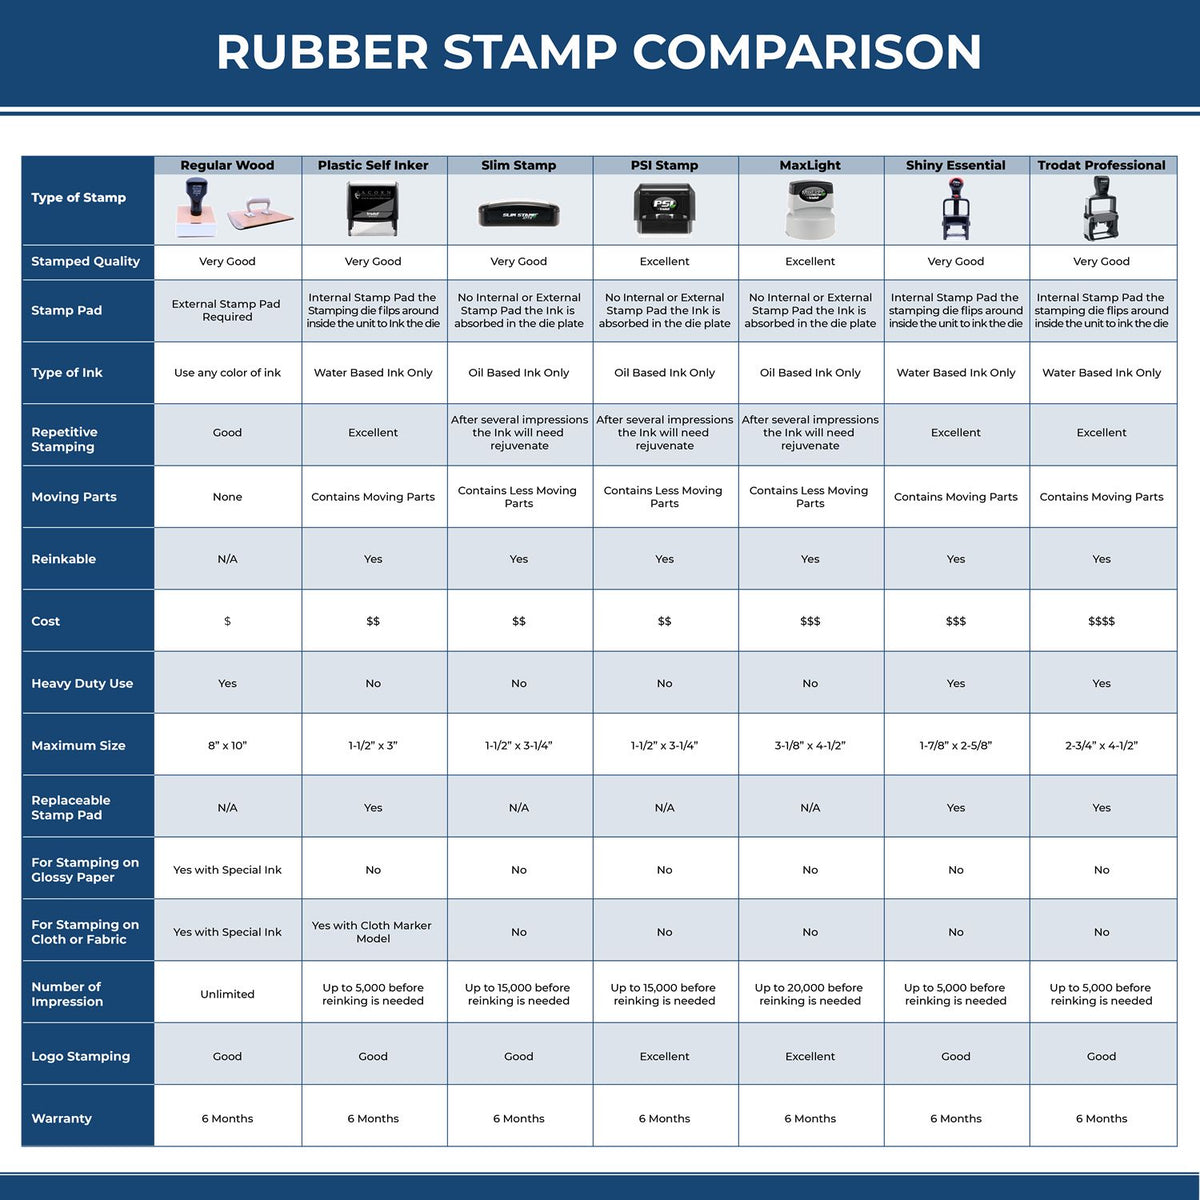 Large Posted Rubber Stamp 4144R Rubber Stamp Comparison